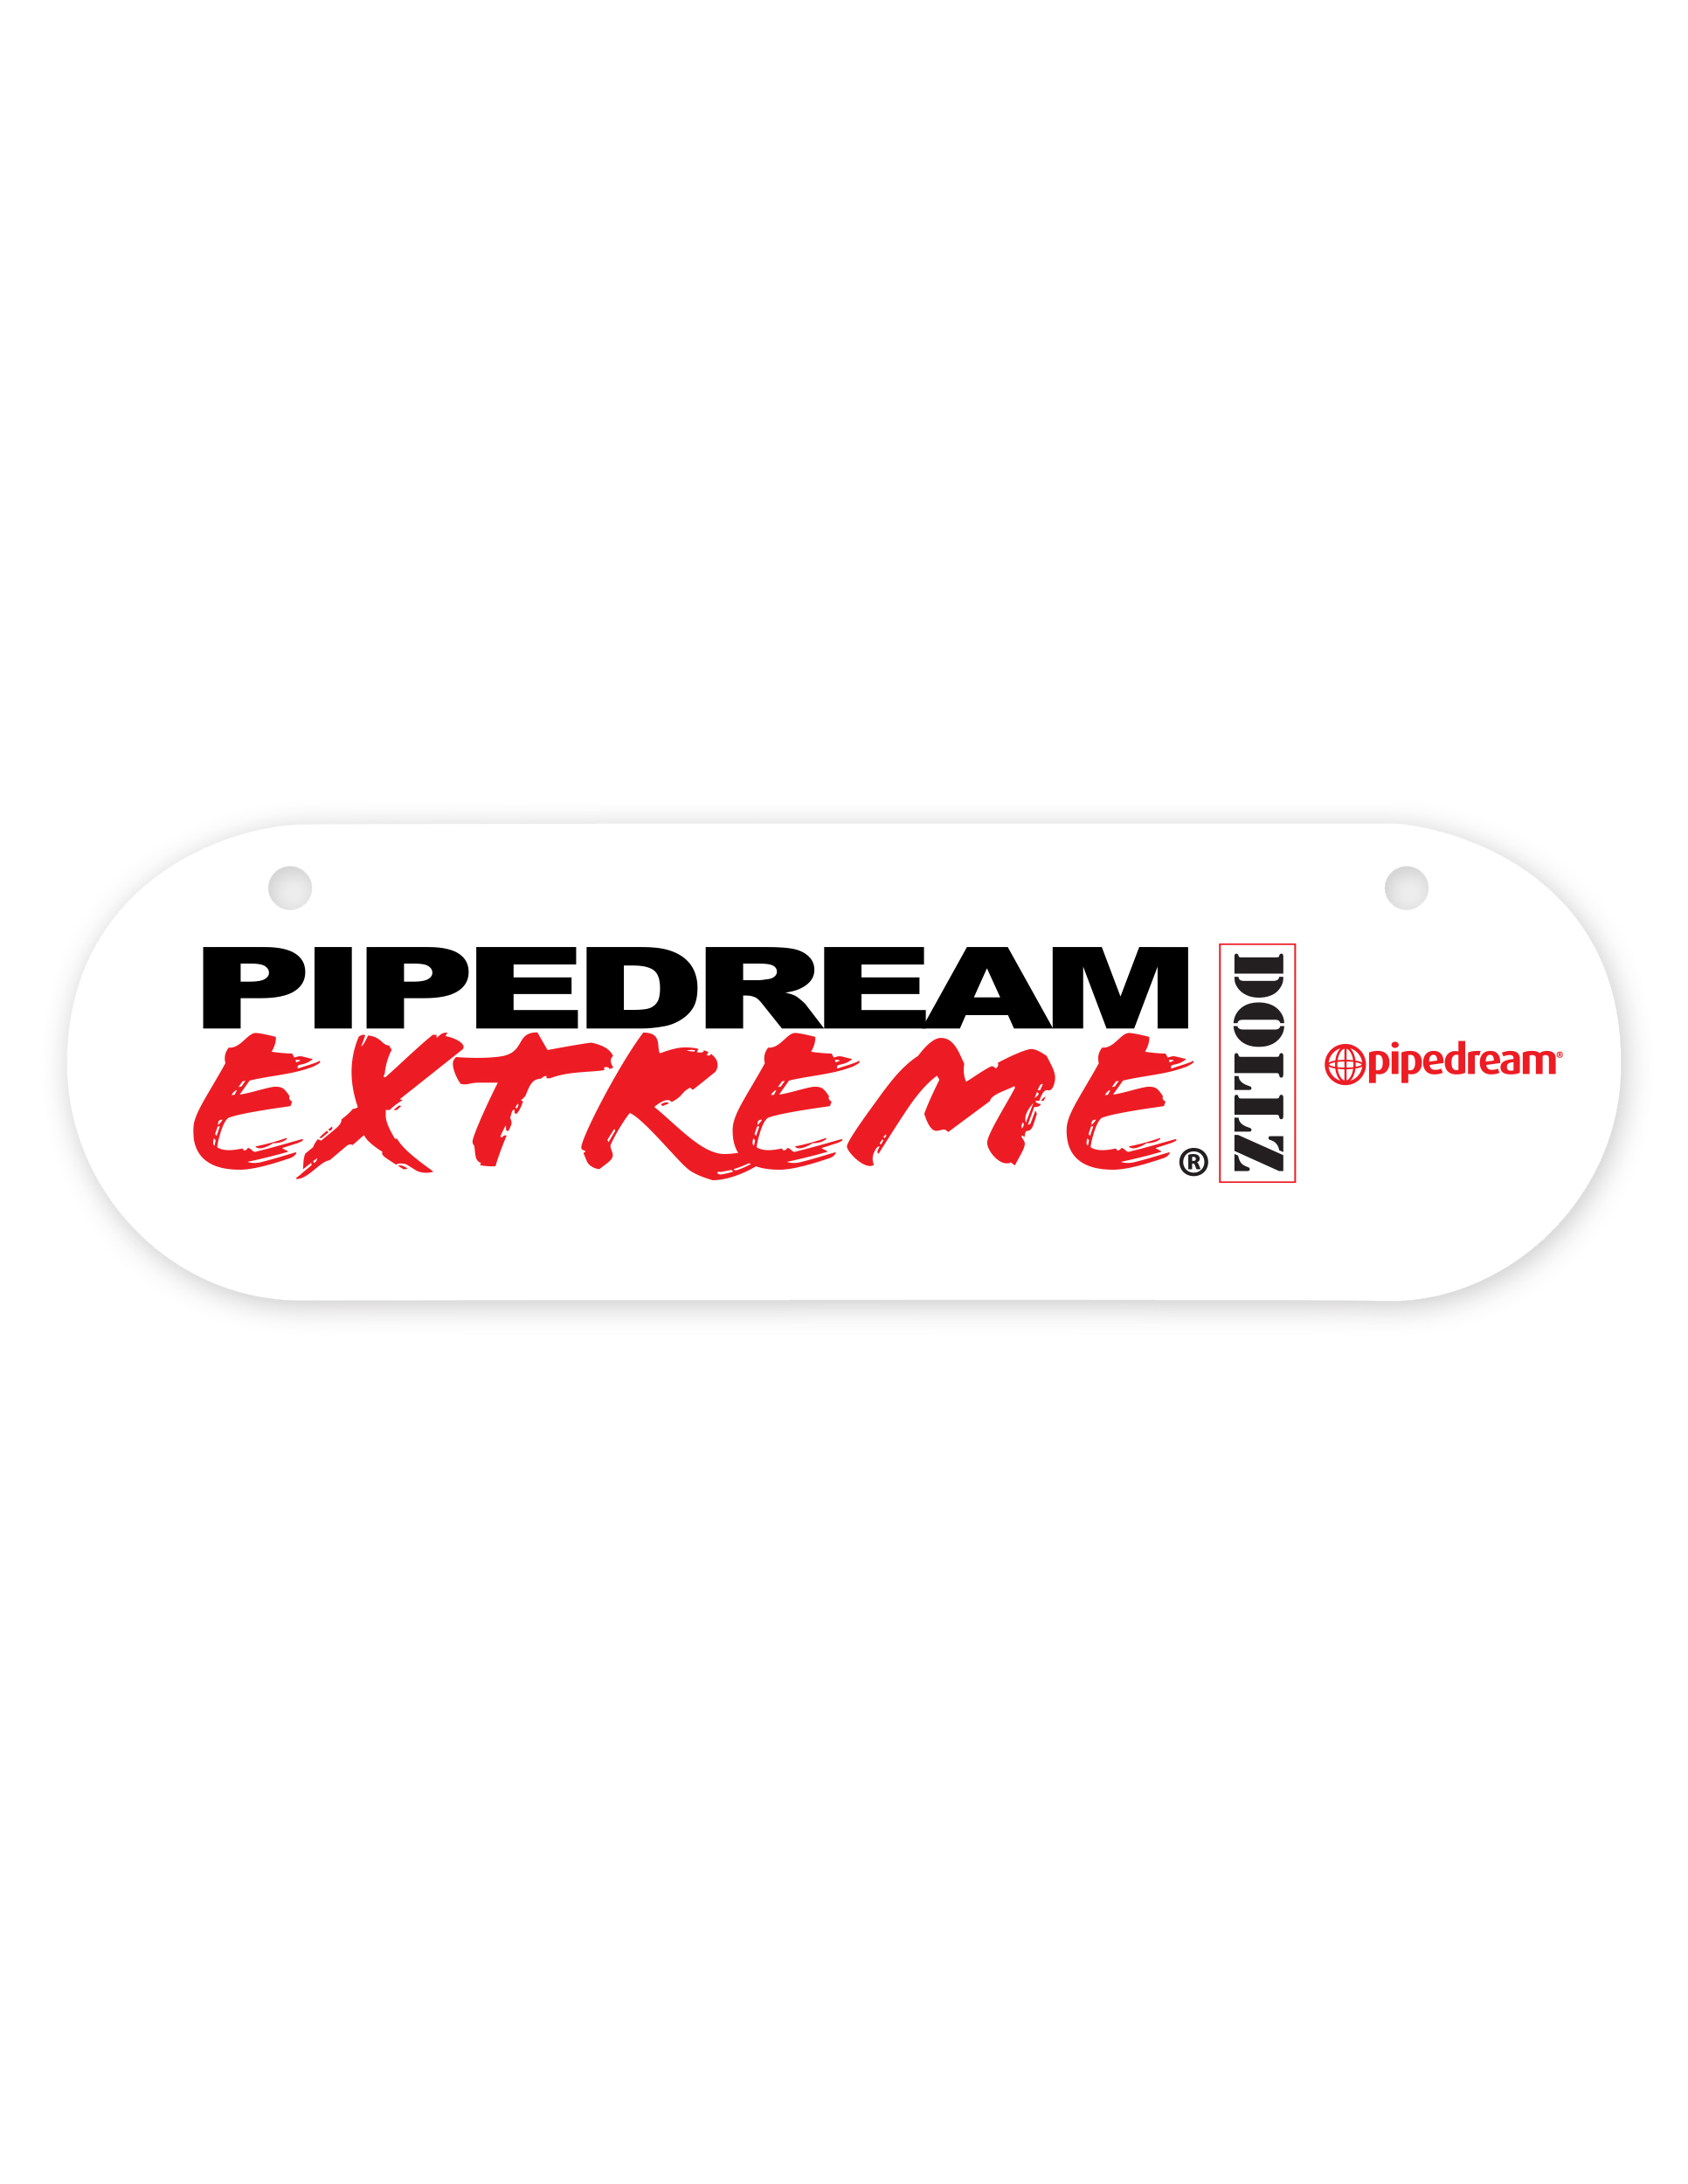 PIPEDREAM EXTREME DOLLZ SIGN 6INx18IN (2014)